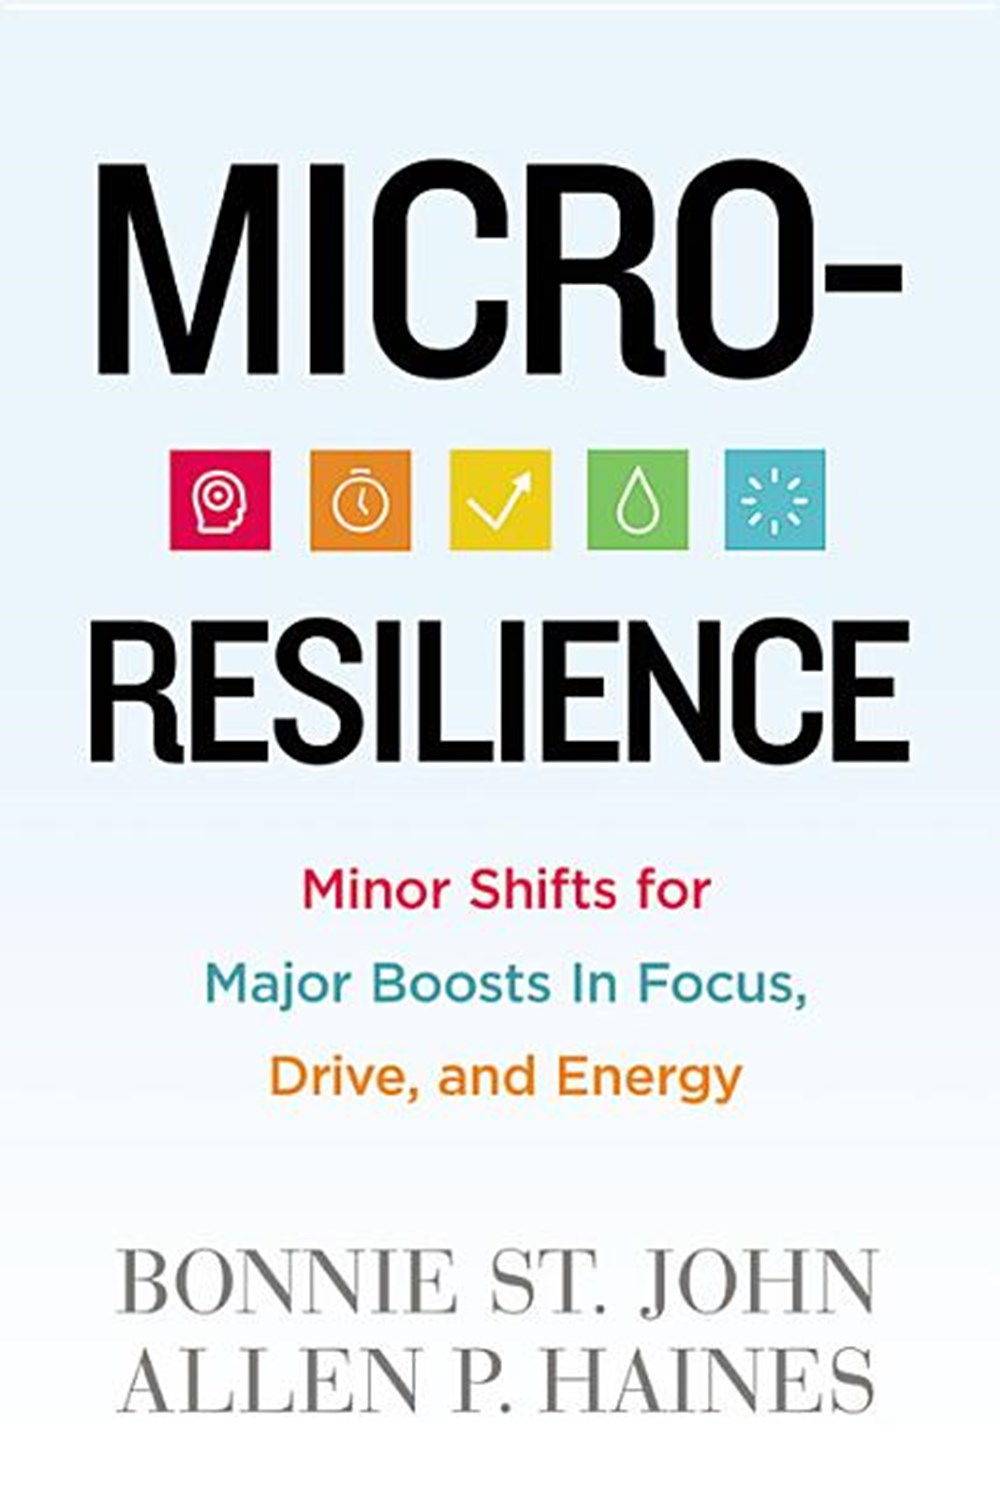 Micro-Resilience Minor Shifts for Major Boosts in Focus, Drive, and Energy